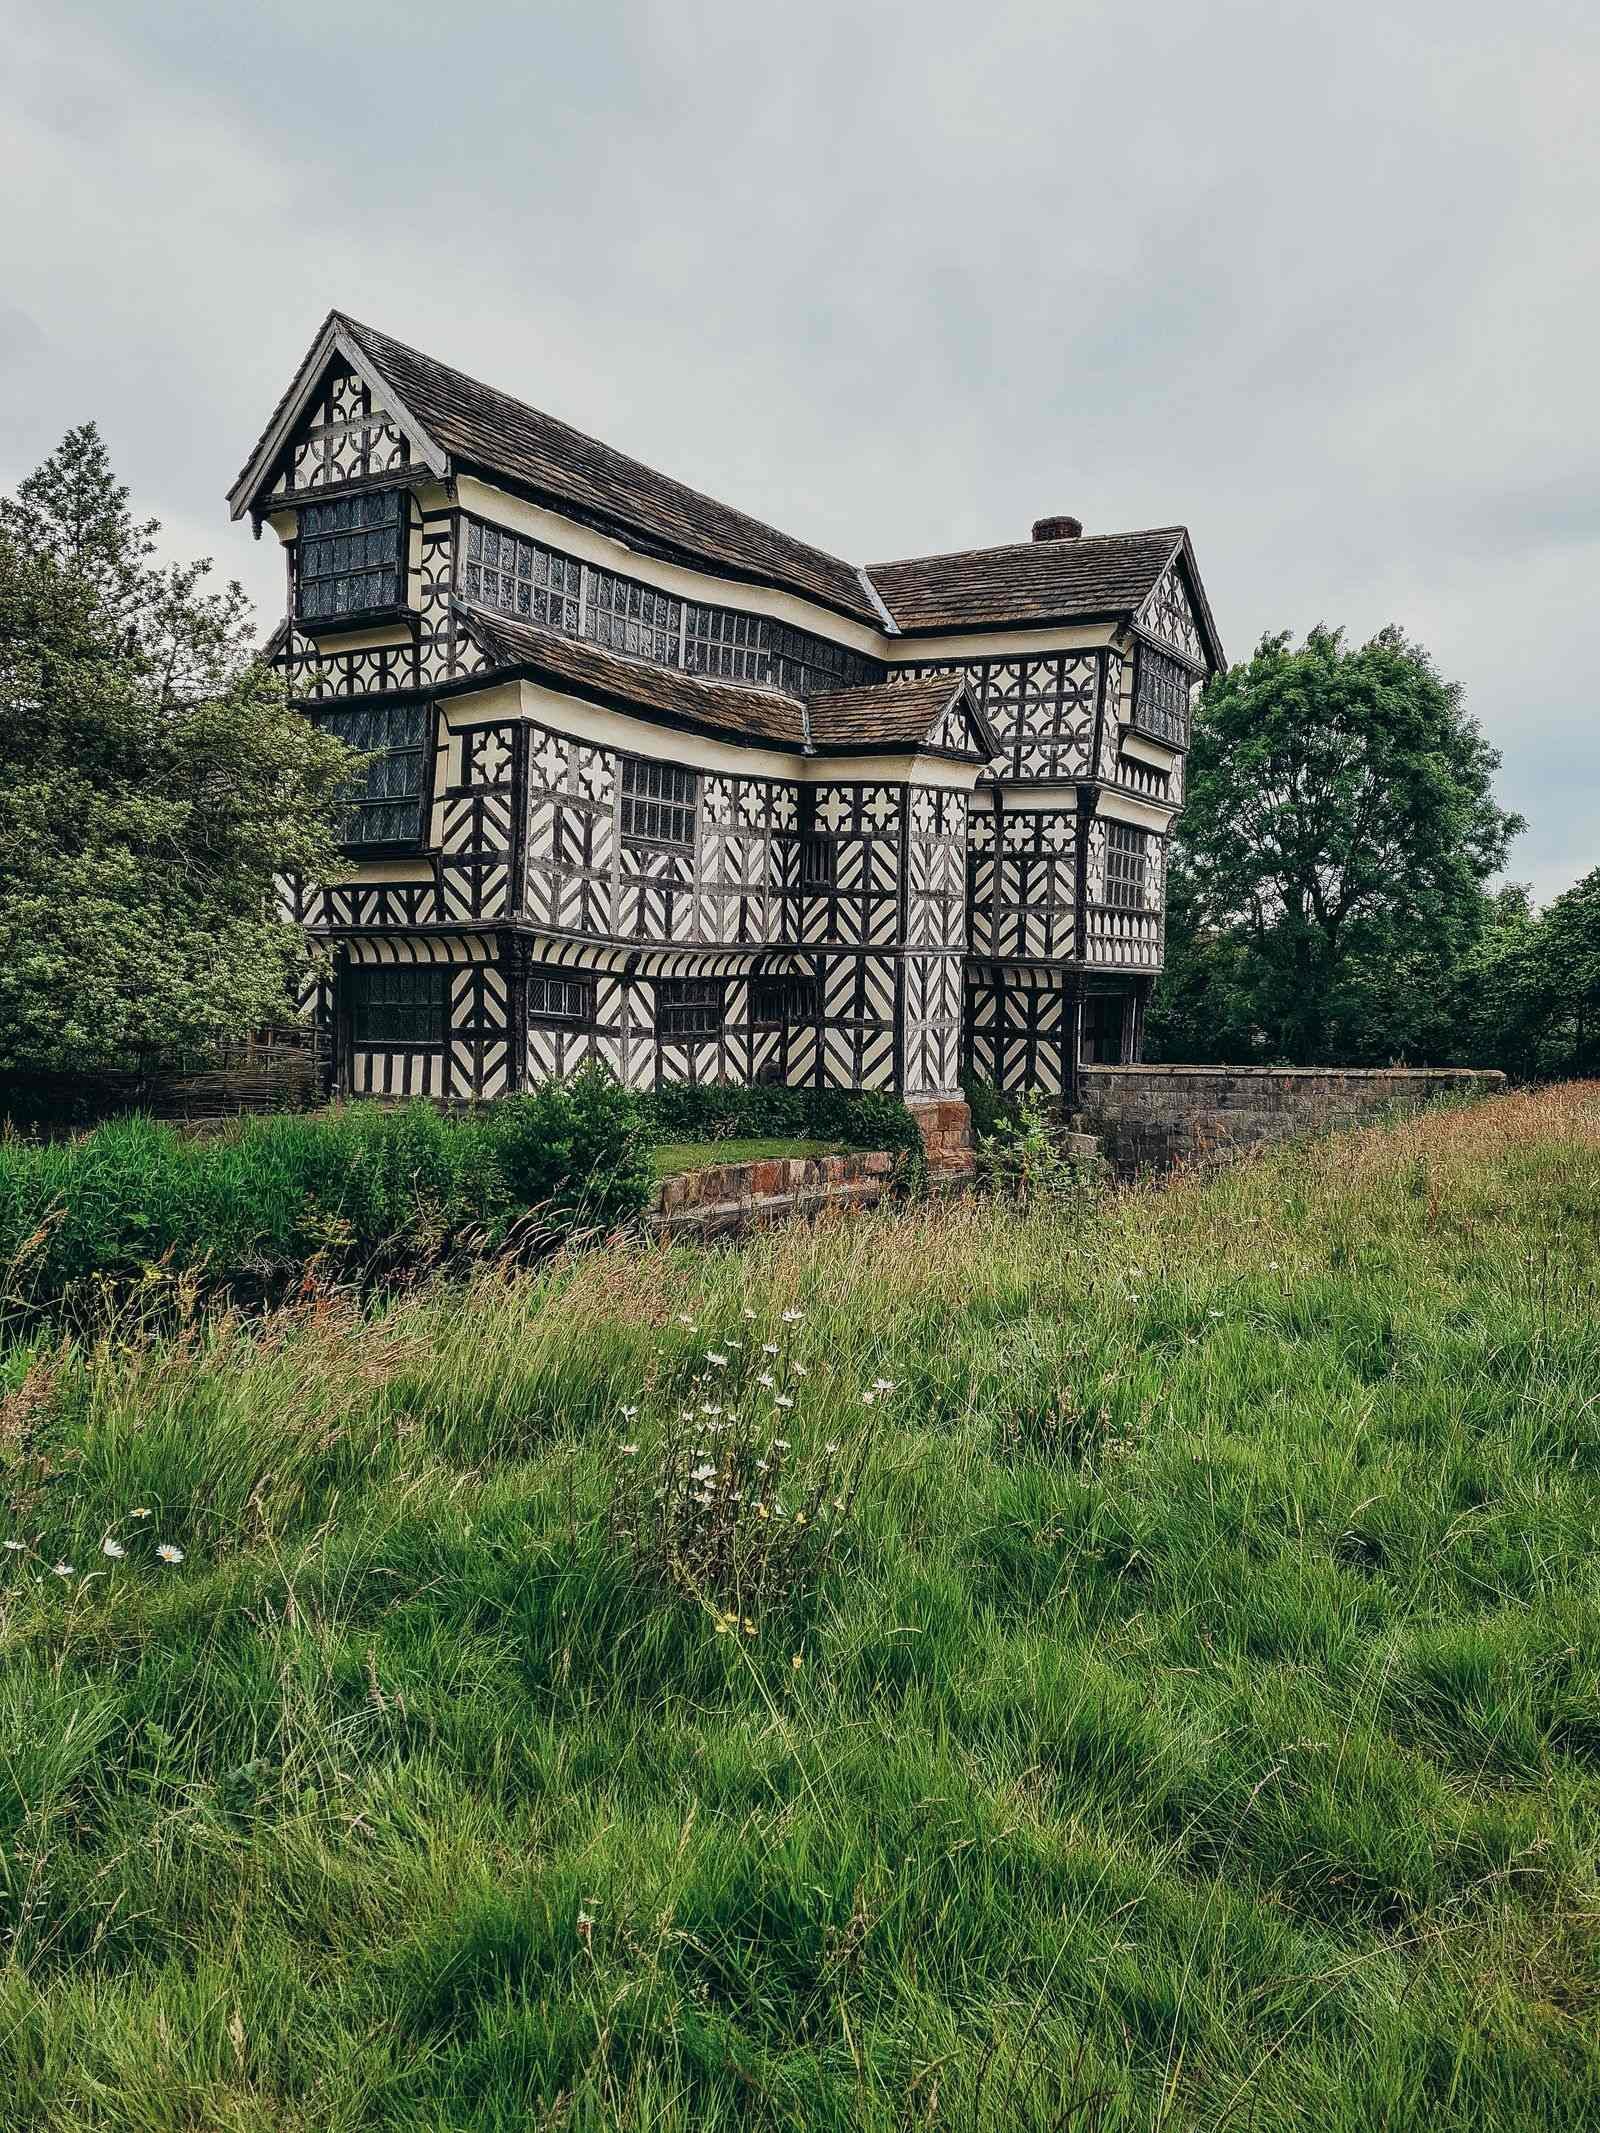 a large 3 storey black and white timber framed tudor mansion that leans outwards, situated in a grassy meadow